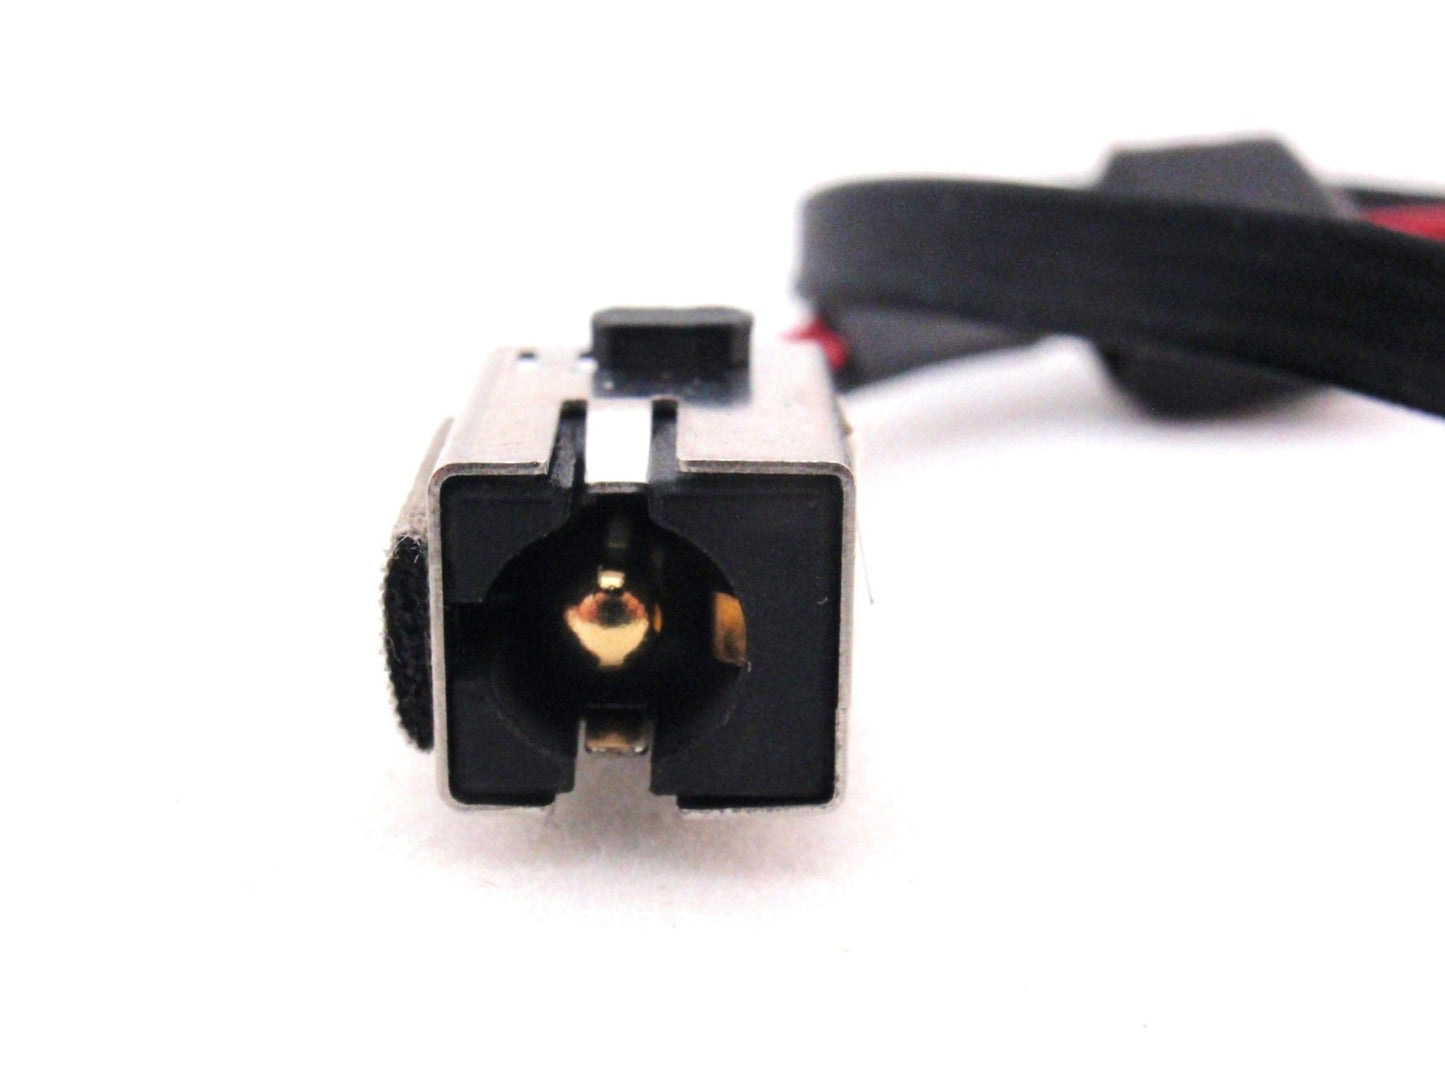 ASUS New DC In Power Jack Charging Port Connector Cable K75 K75A K75DE K75V K75VD K75VM K75VJ DC30100IY00 14004-00740000